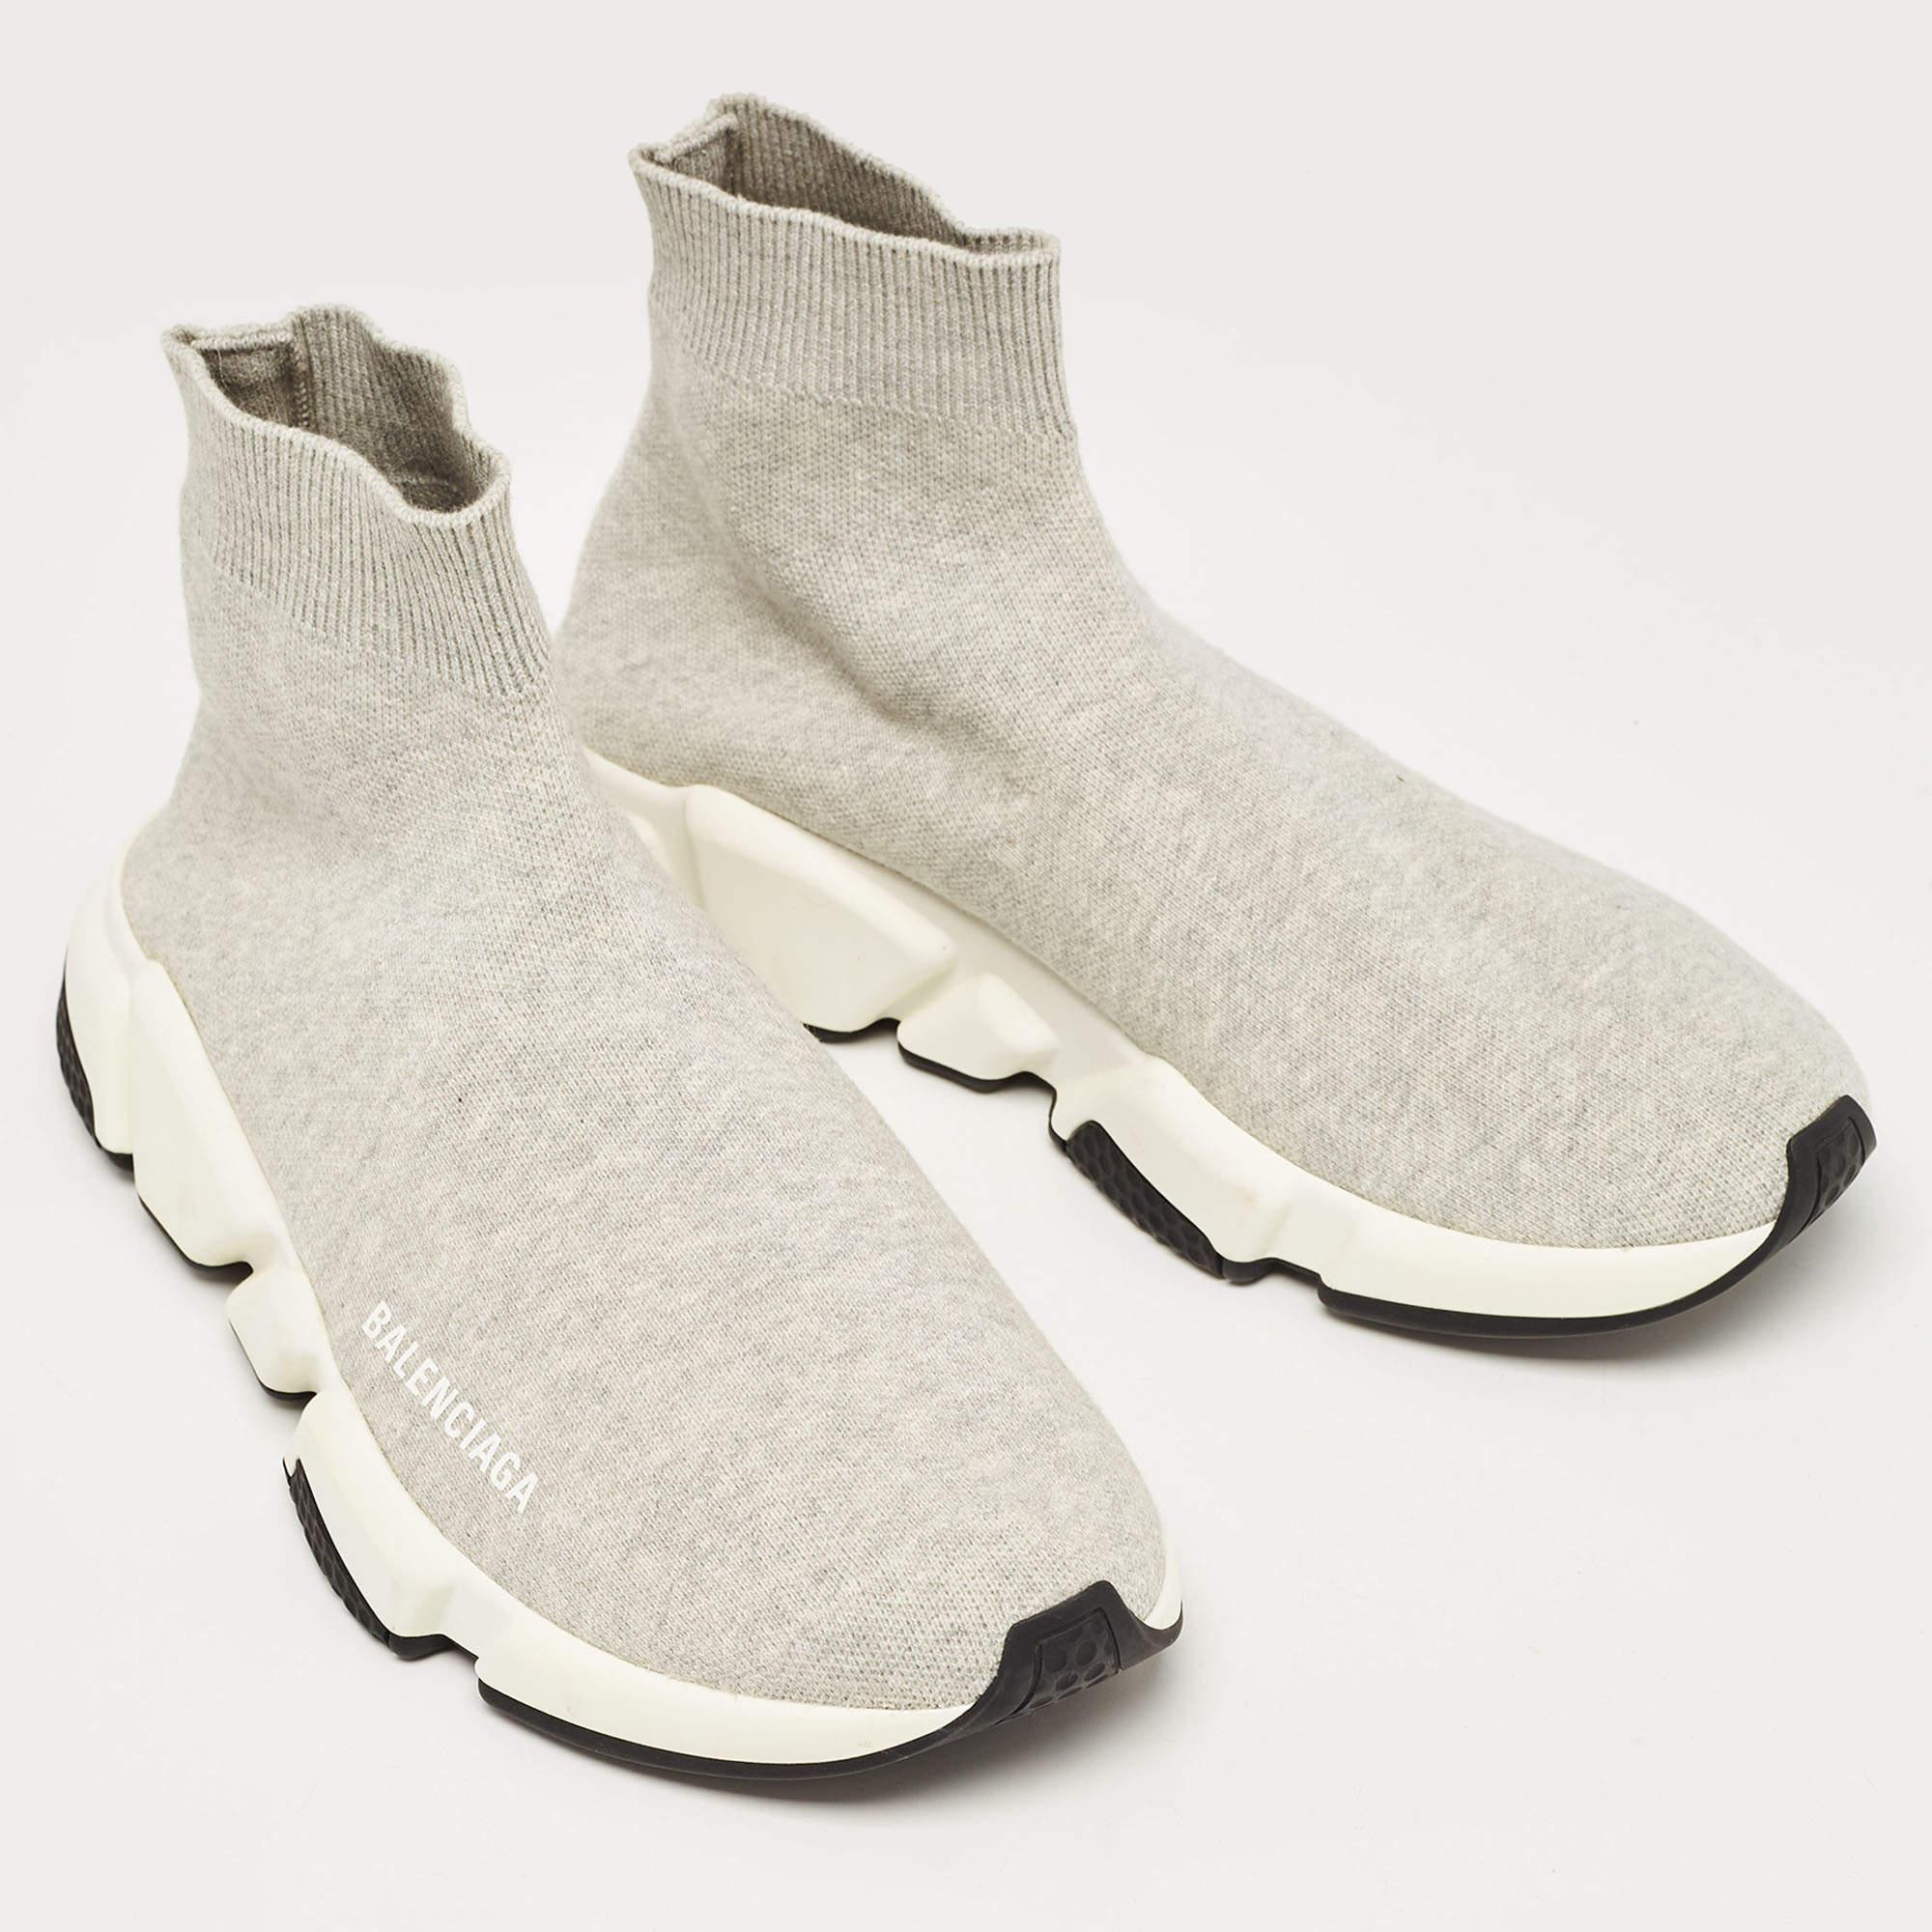 Elevate your footwear game with these Balenciaga sneakers. Combining high-end aesthetics and unmatched comfort, these sneakers are a symbol of modern luxury and impeccable taste.

